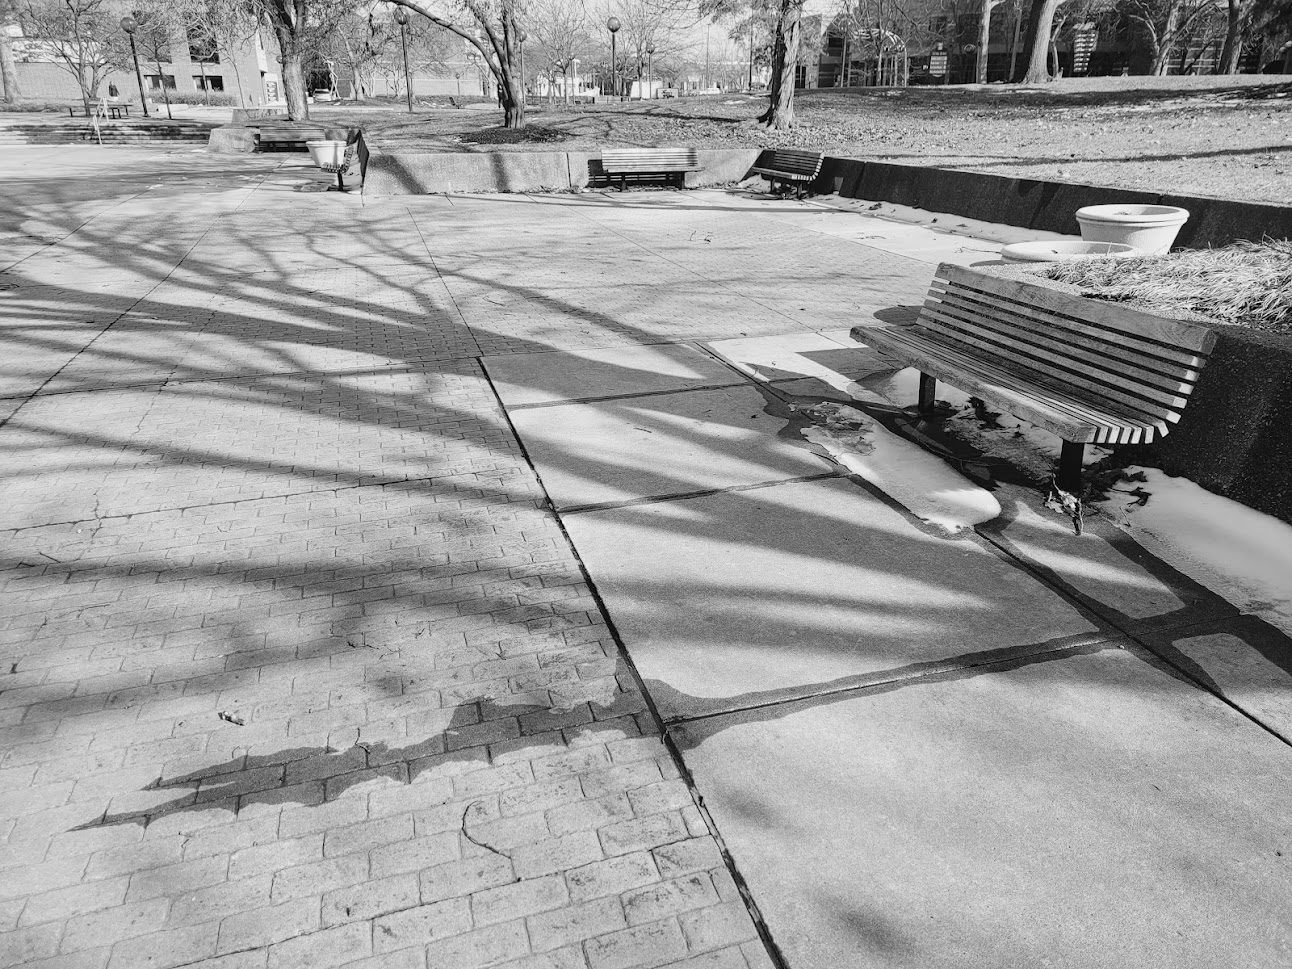 A black and white photograph of a brick path with benches and empty flower pots. In the background you can see buildings and lampposts. 